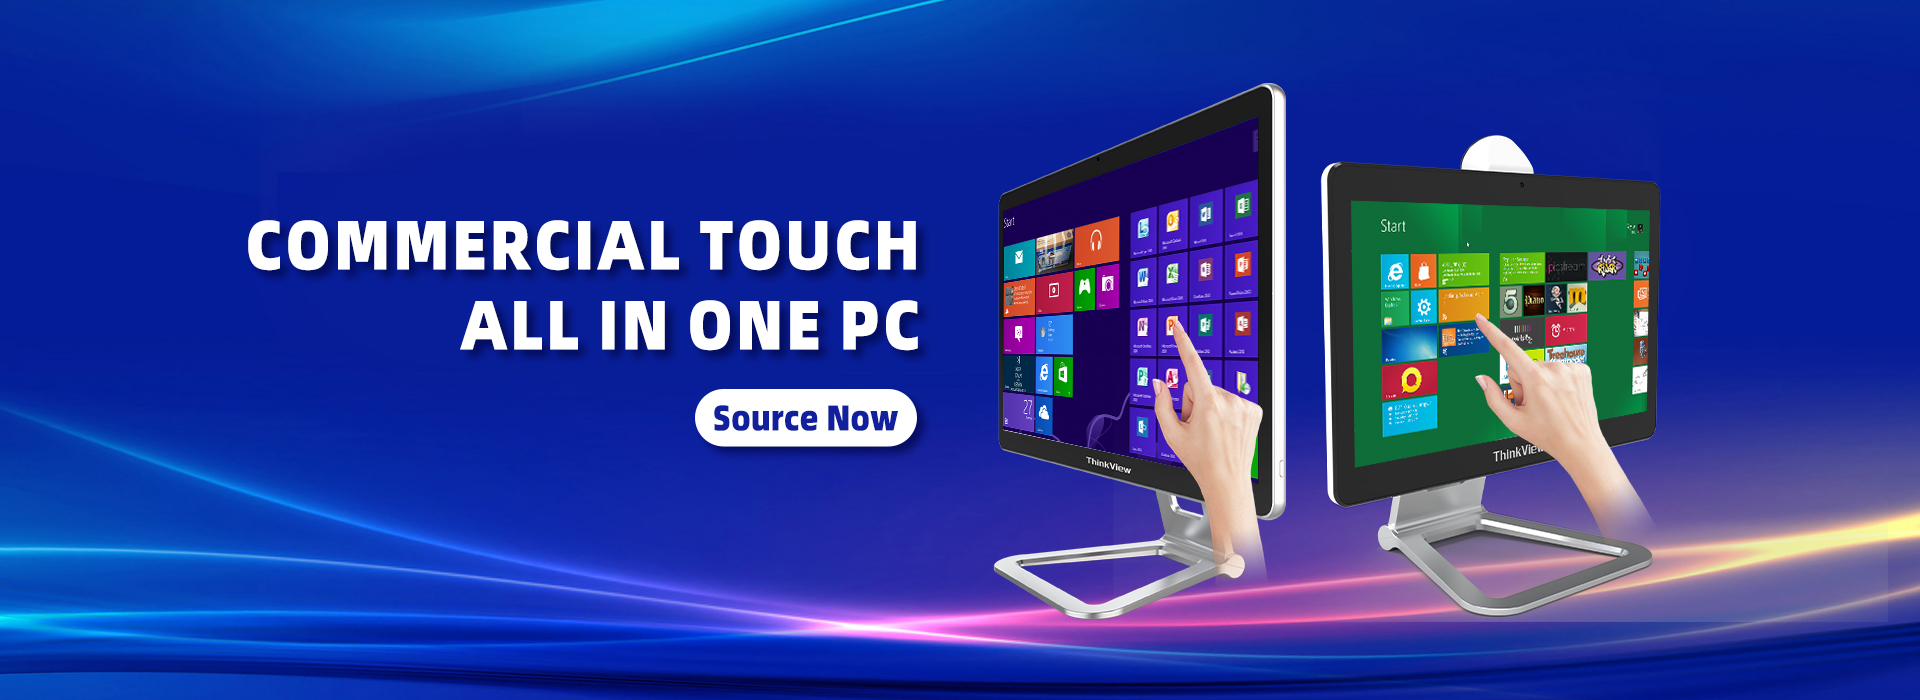 Commercial Touch All in one PC